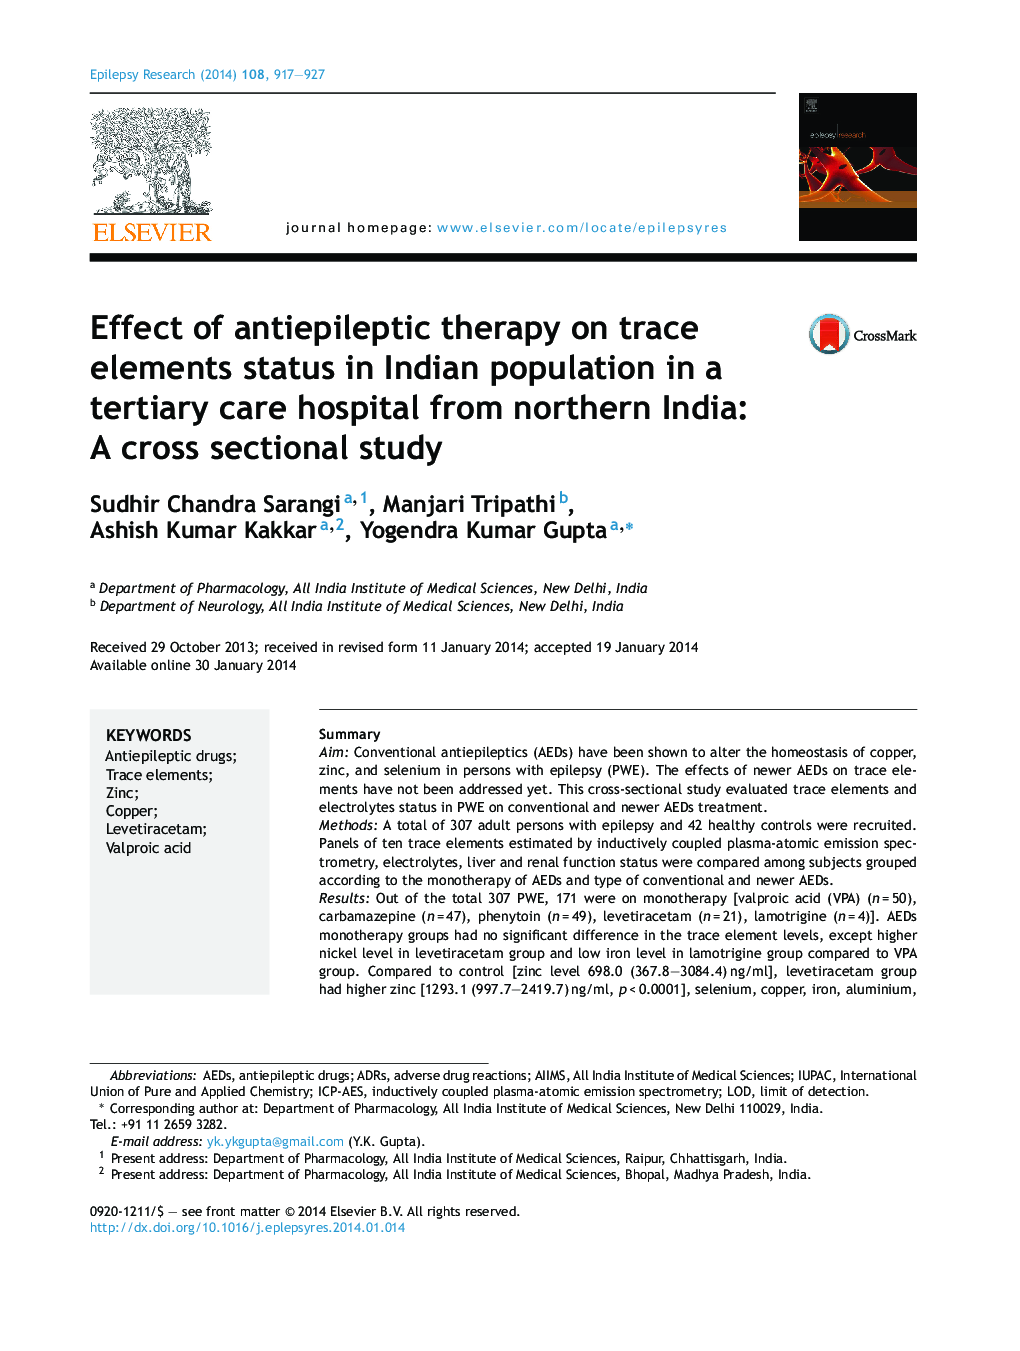 Effect of antiepileptic therapy on trace elements status in Indian population in a tertiary care hospital from northern India: A cross sectional study